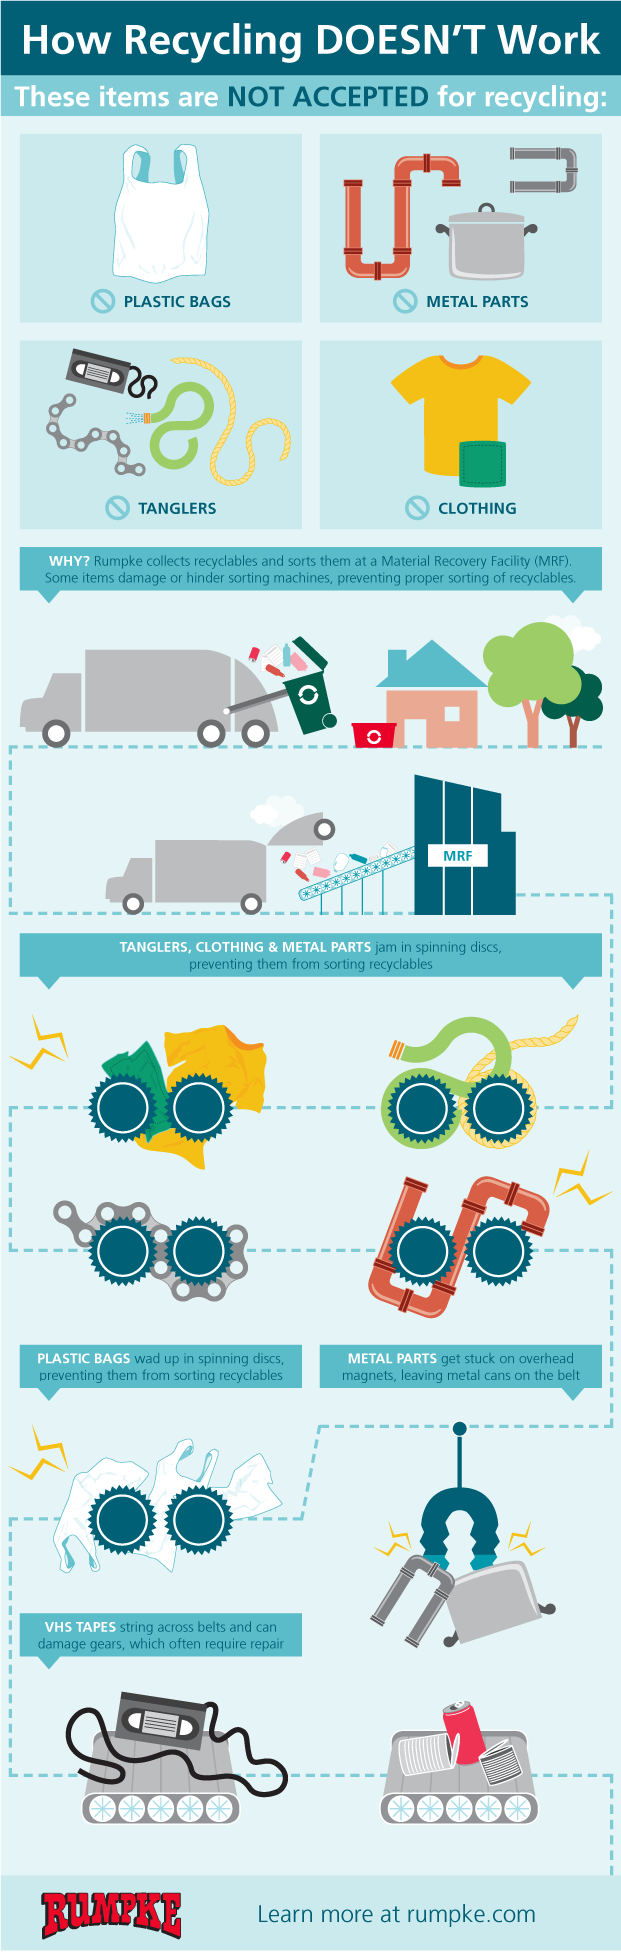 Infographic_HowRecyclingDOESNTWork